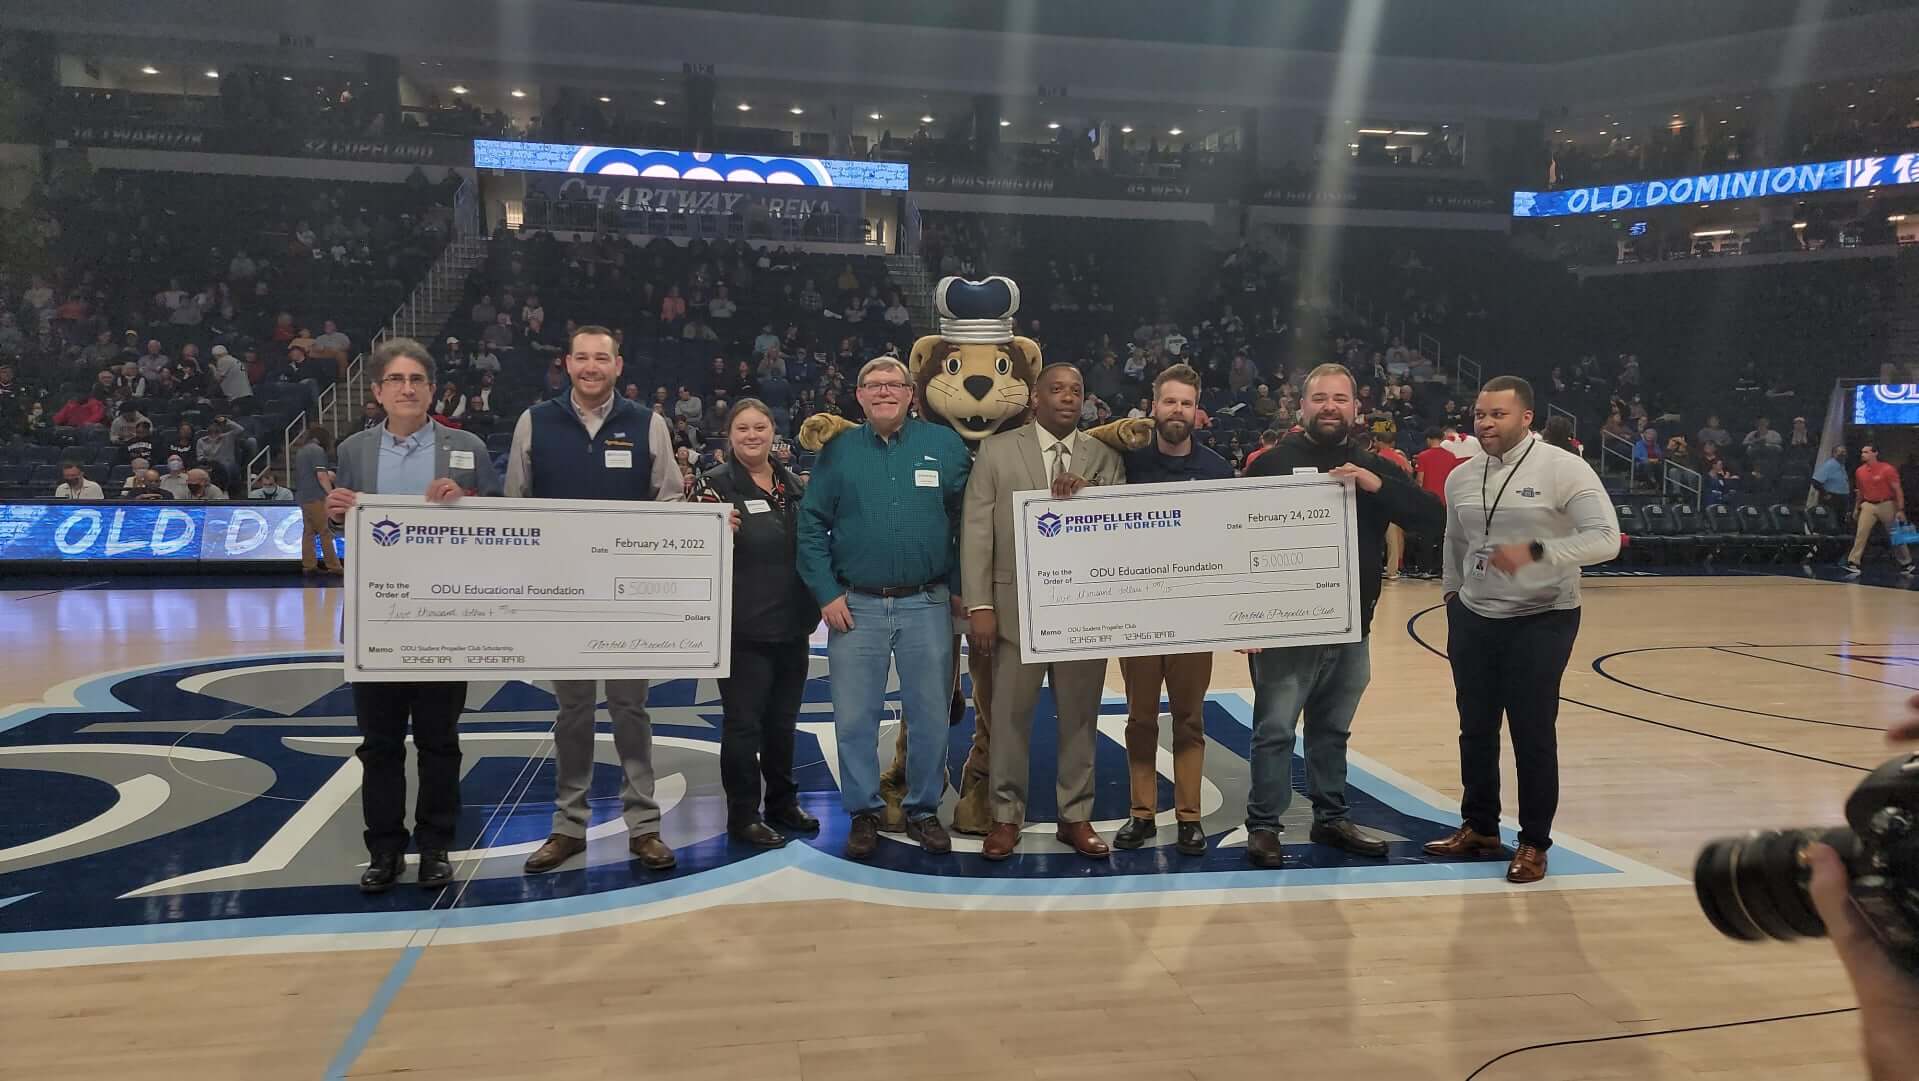 $10,000 Raised for the ODU Student Propeller Club!